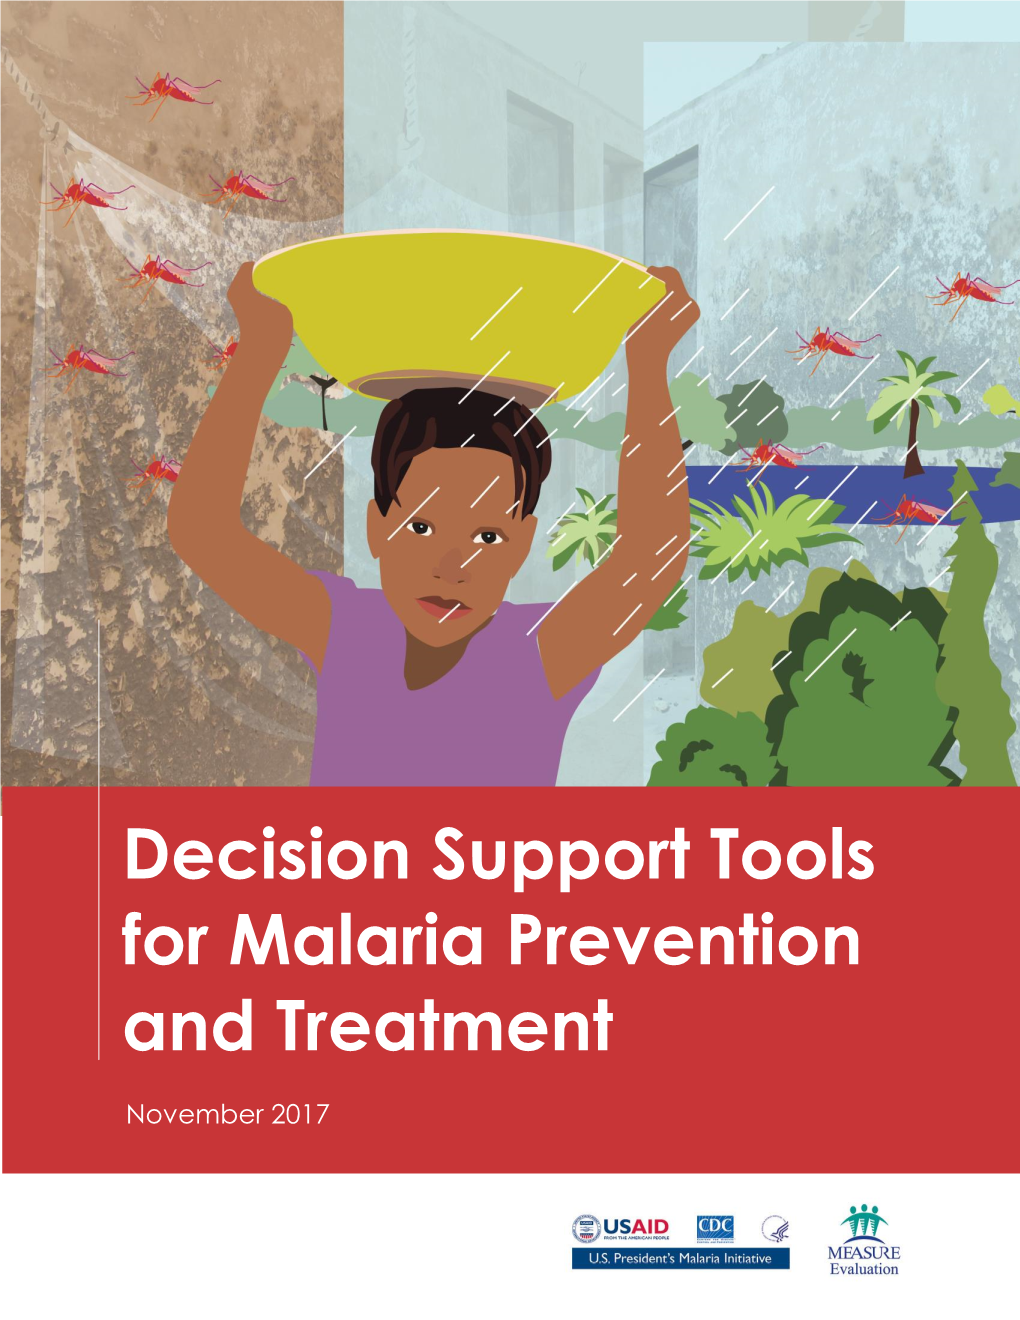 Decision Support Tools for Malaria Prevention and Treatment